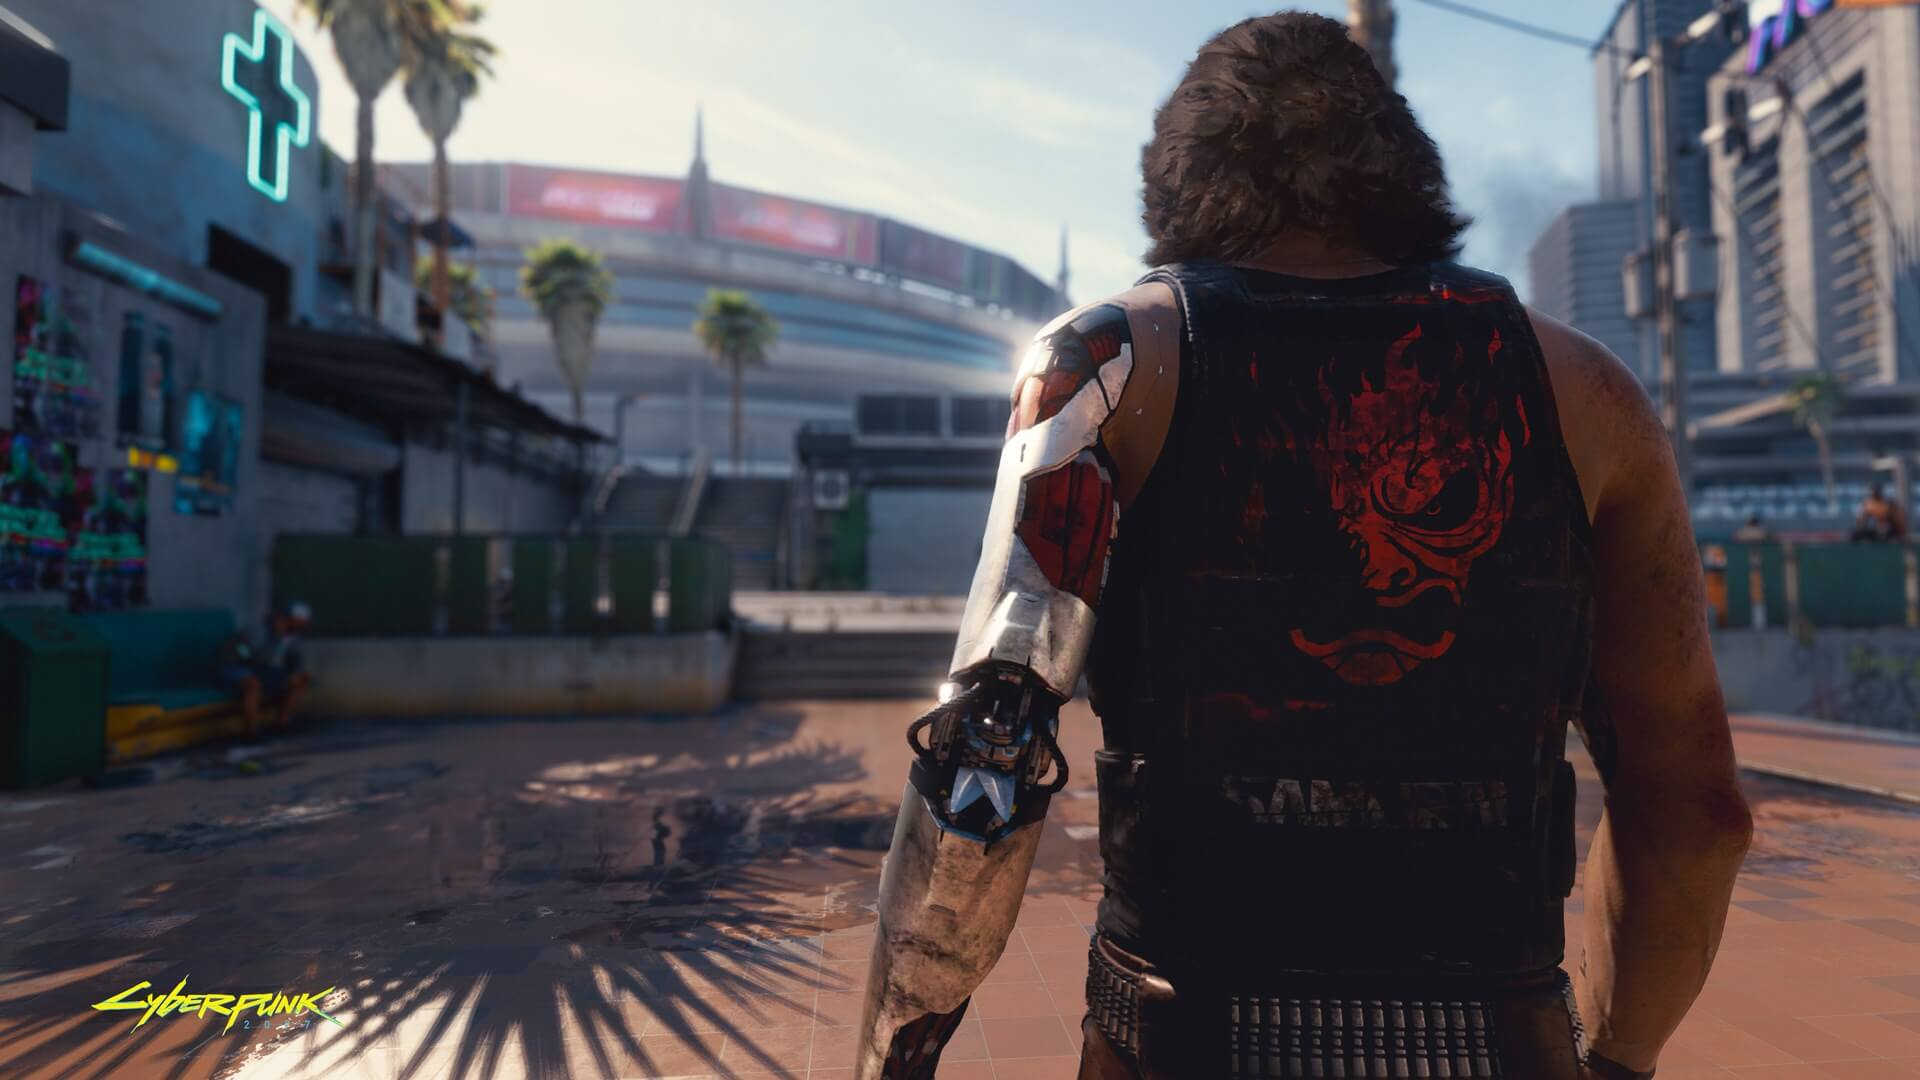 'Cyberpunk 2077' Reviewer Publishes PSA Warning About Epileptic Triggers